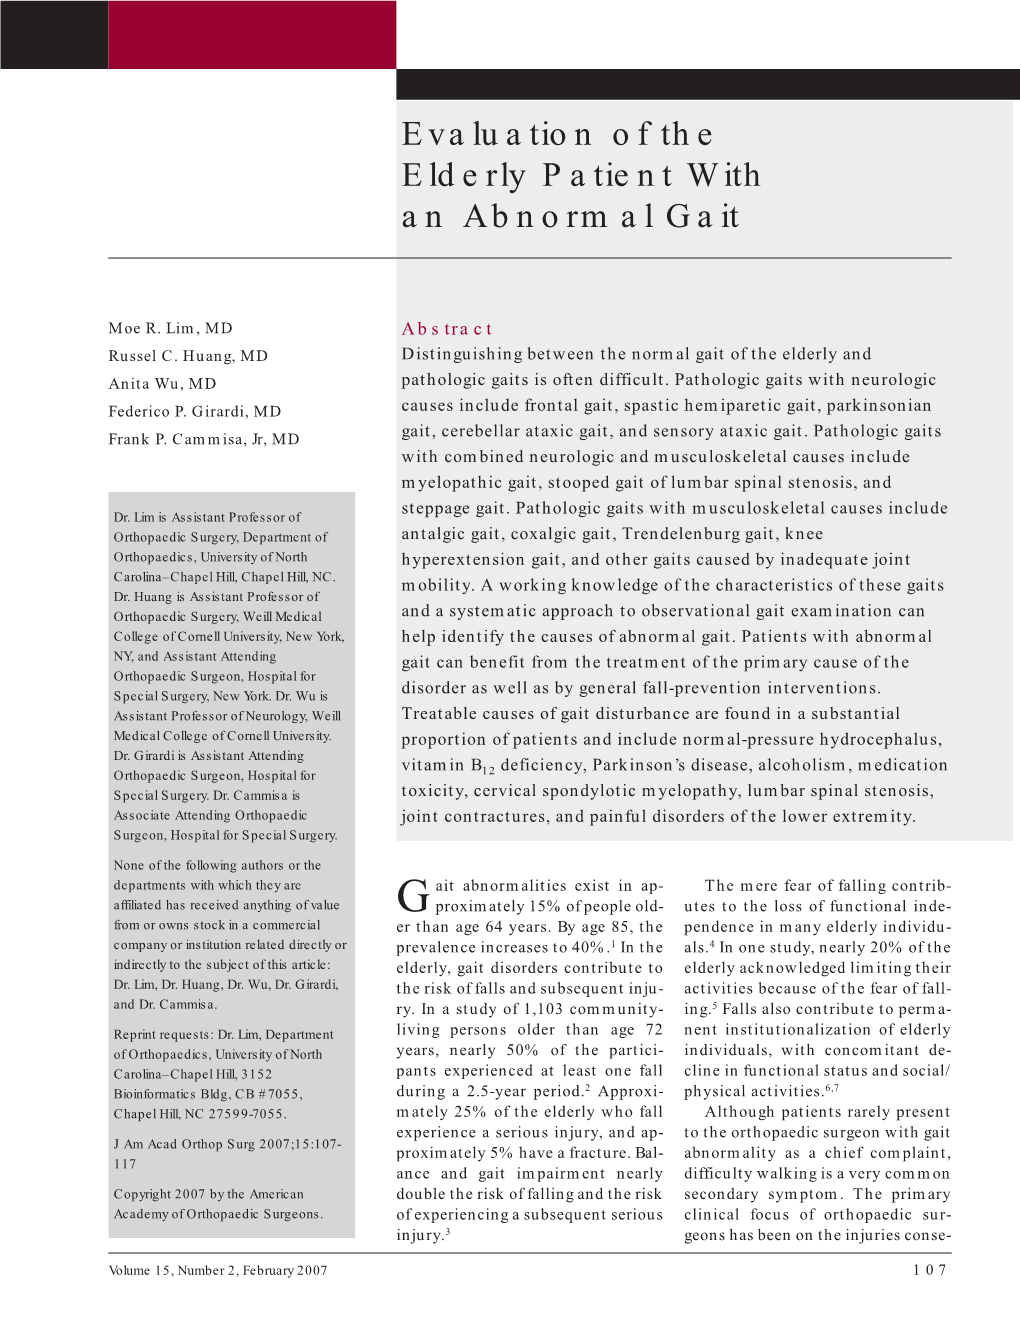 Evaluation of the Elderly Patient with an Abnormal Gait